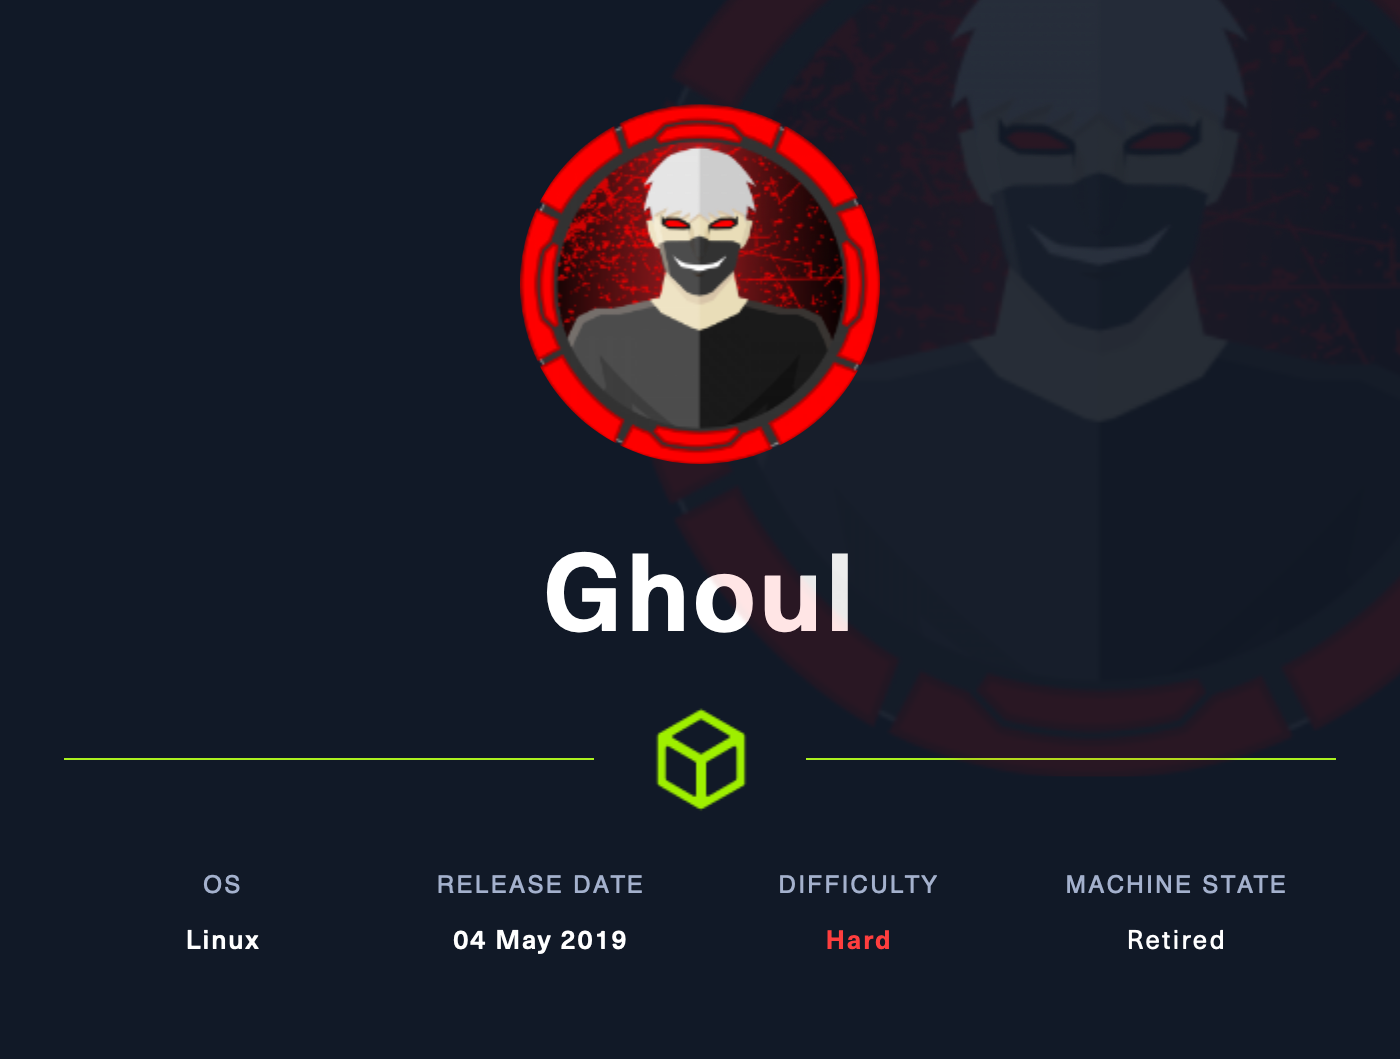 HackTheBox WriteUp — Ghoul. This machine was extremely tough, but